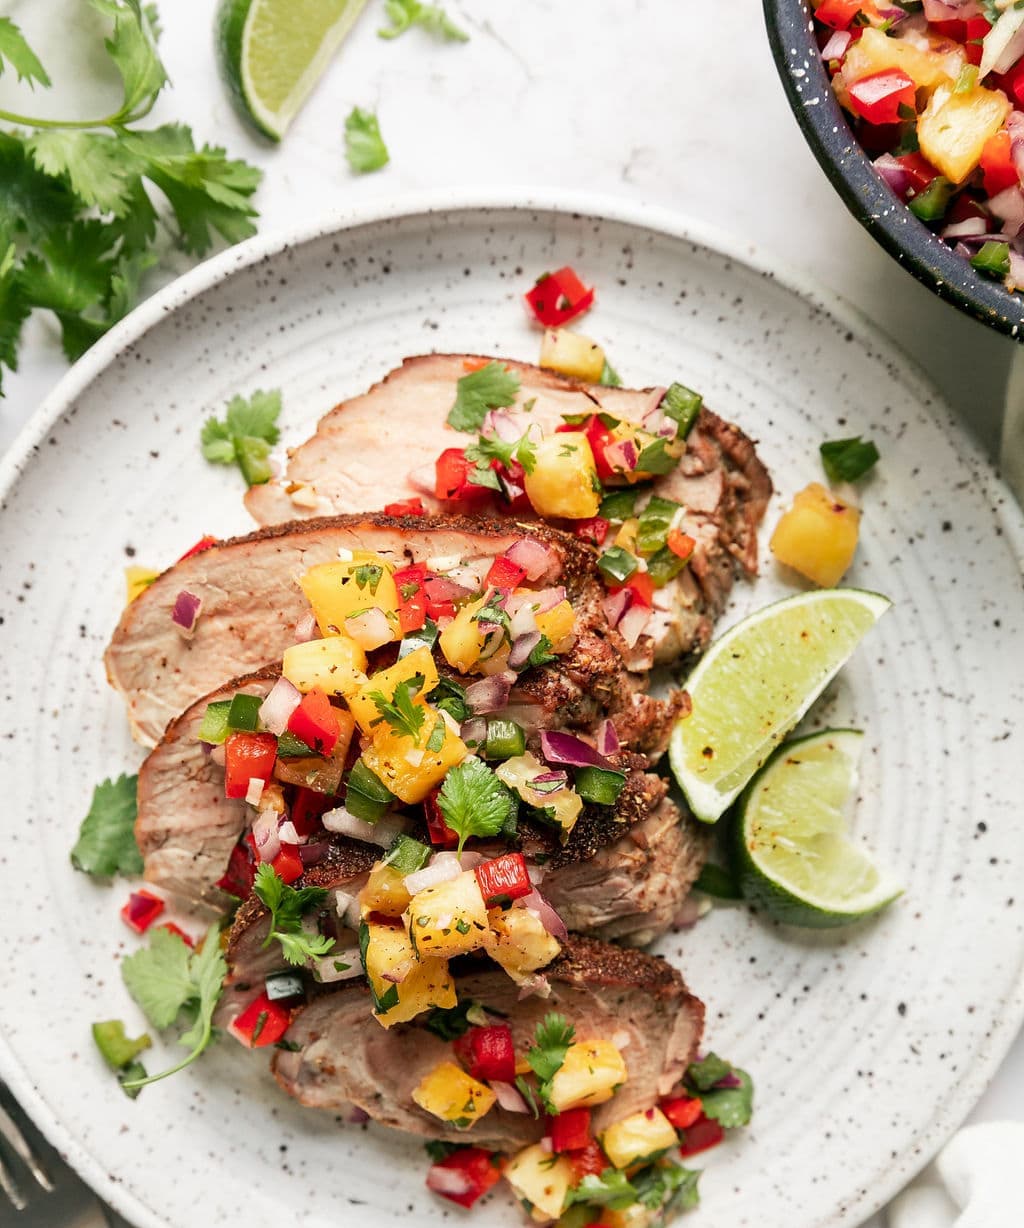 Grilled Pork Loin with Pineapple Salsa